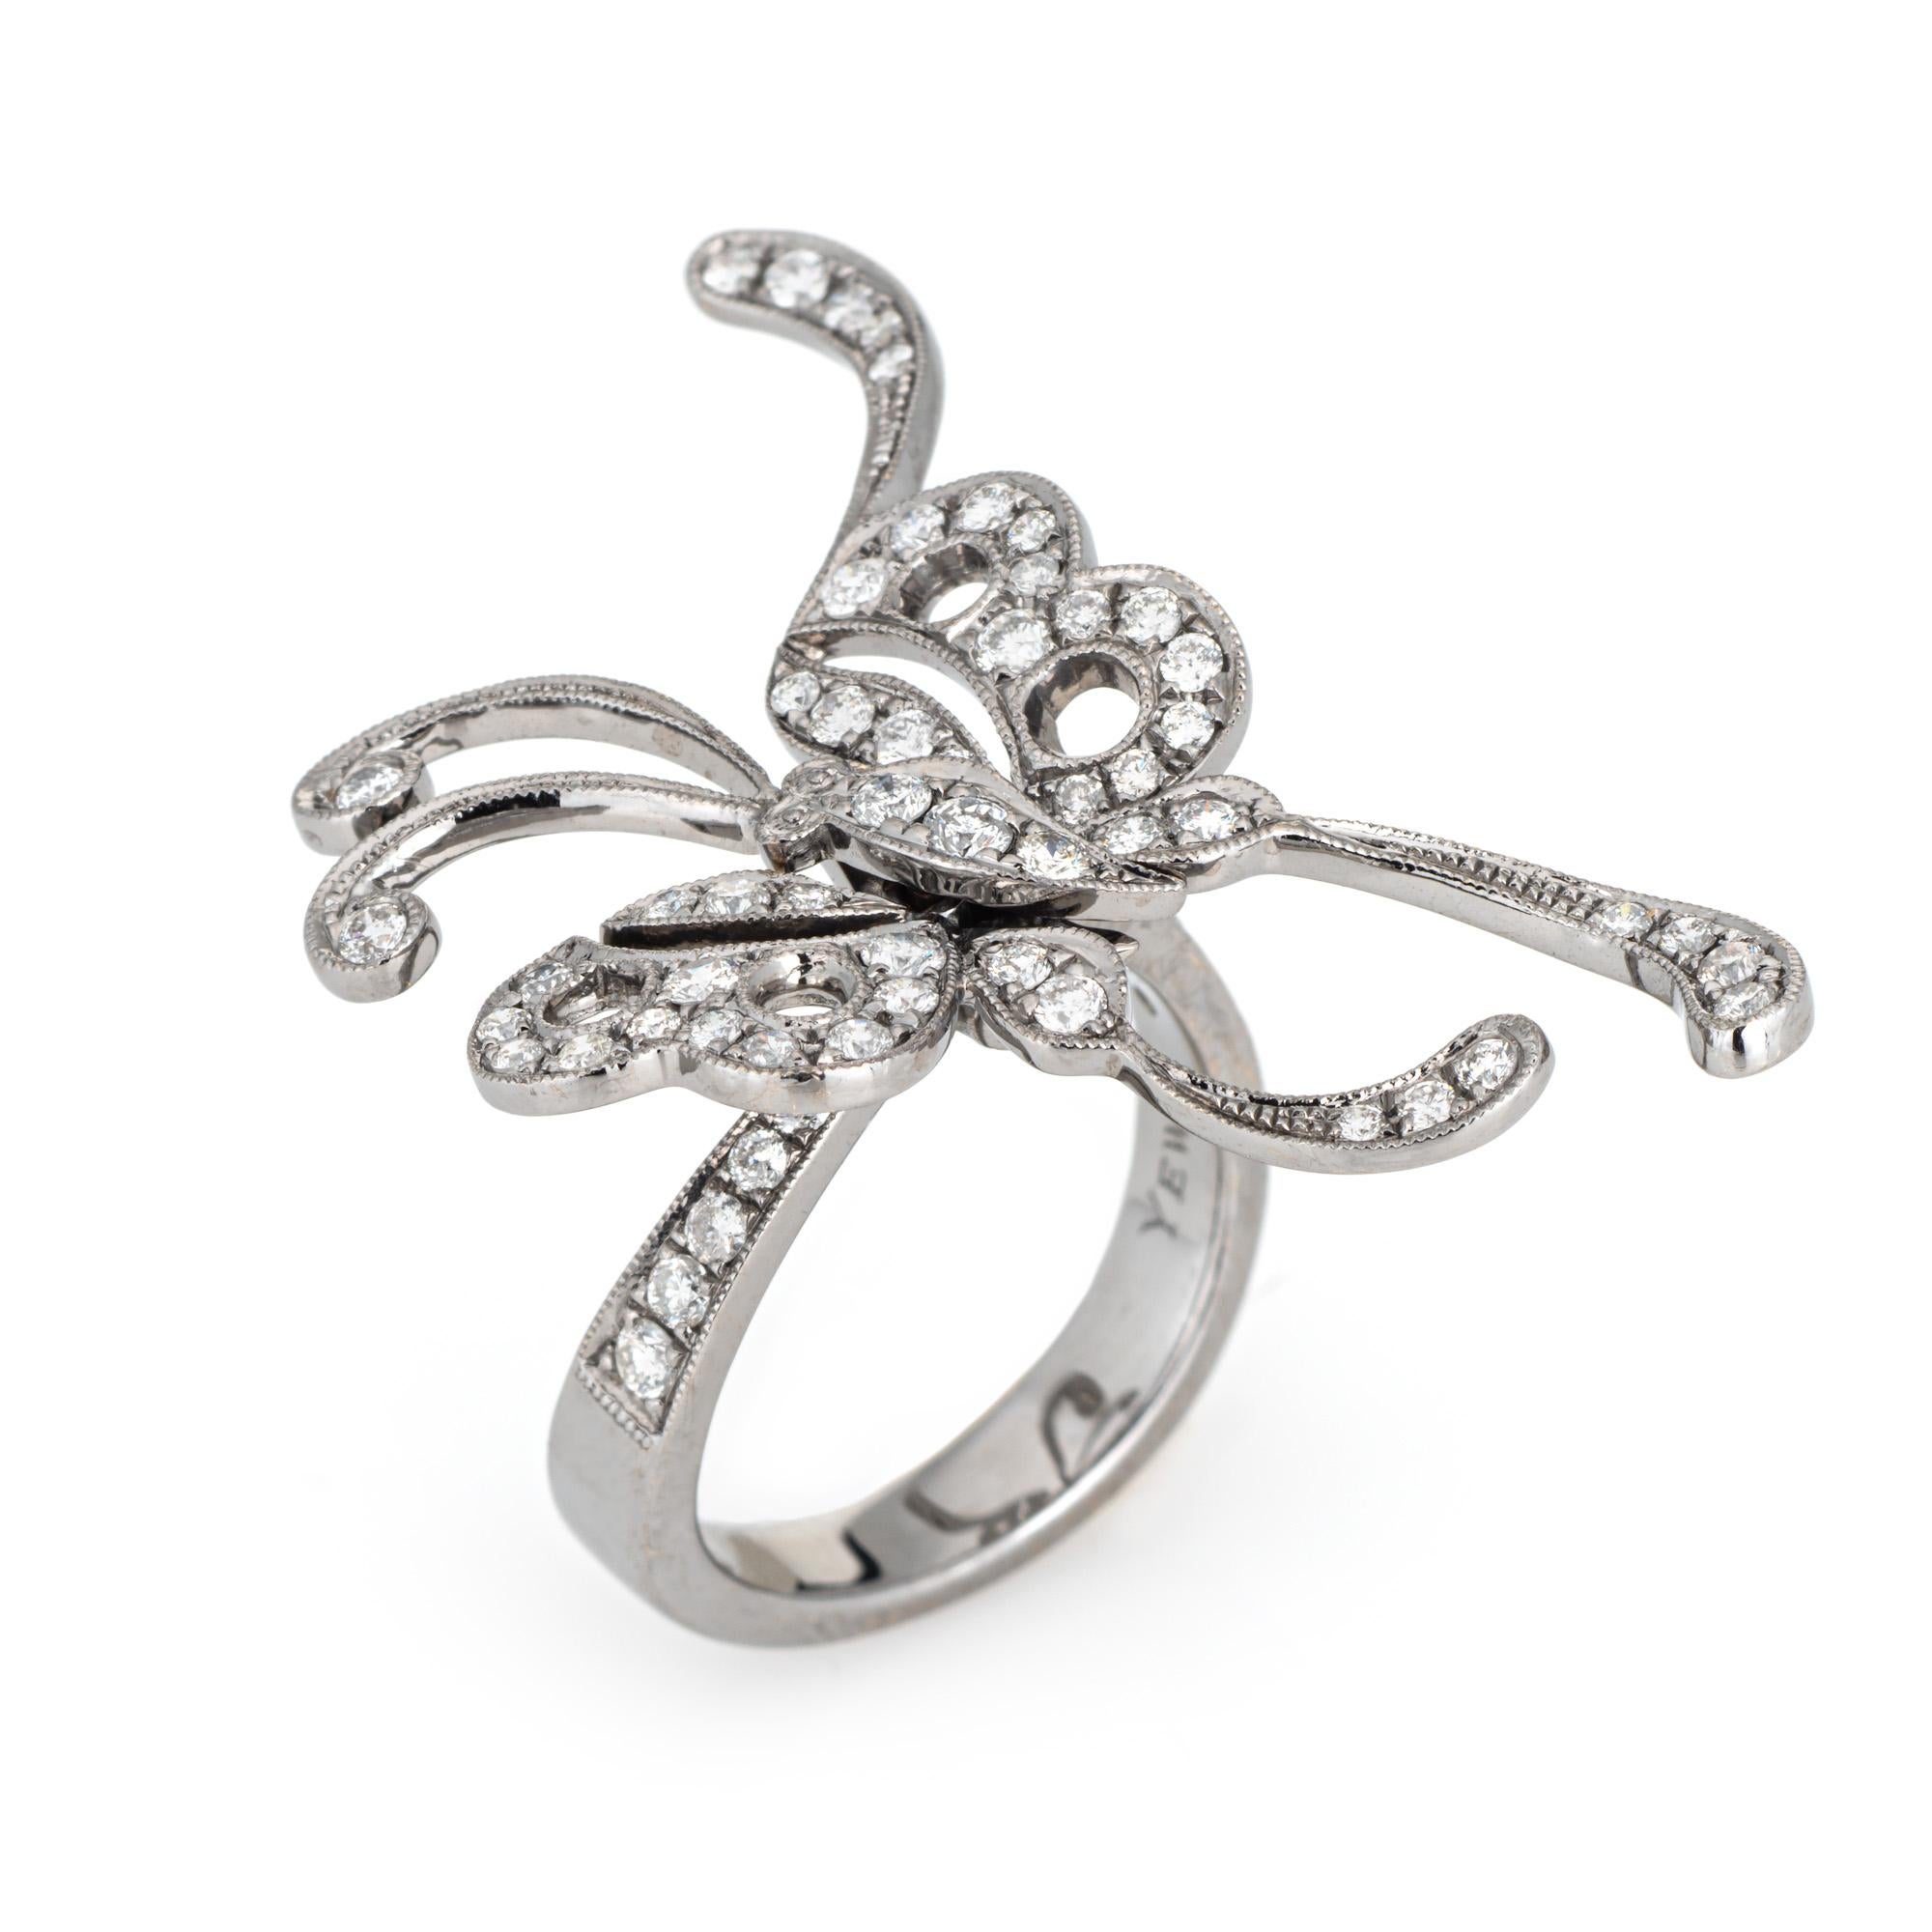 Stylish diamond butterfly ring crafted in 18 karat white gold. 

Diamonds total an estimated 0.74 carats (estimated at H-I color and SI1-I1 clarity).  

With articulated wings the butterfly gracefully moves with you and makes a statement. Diamonds